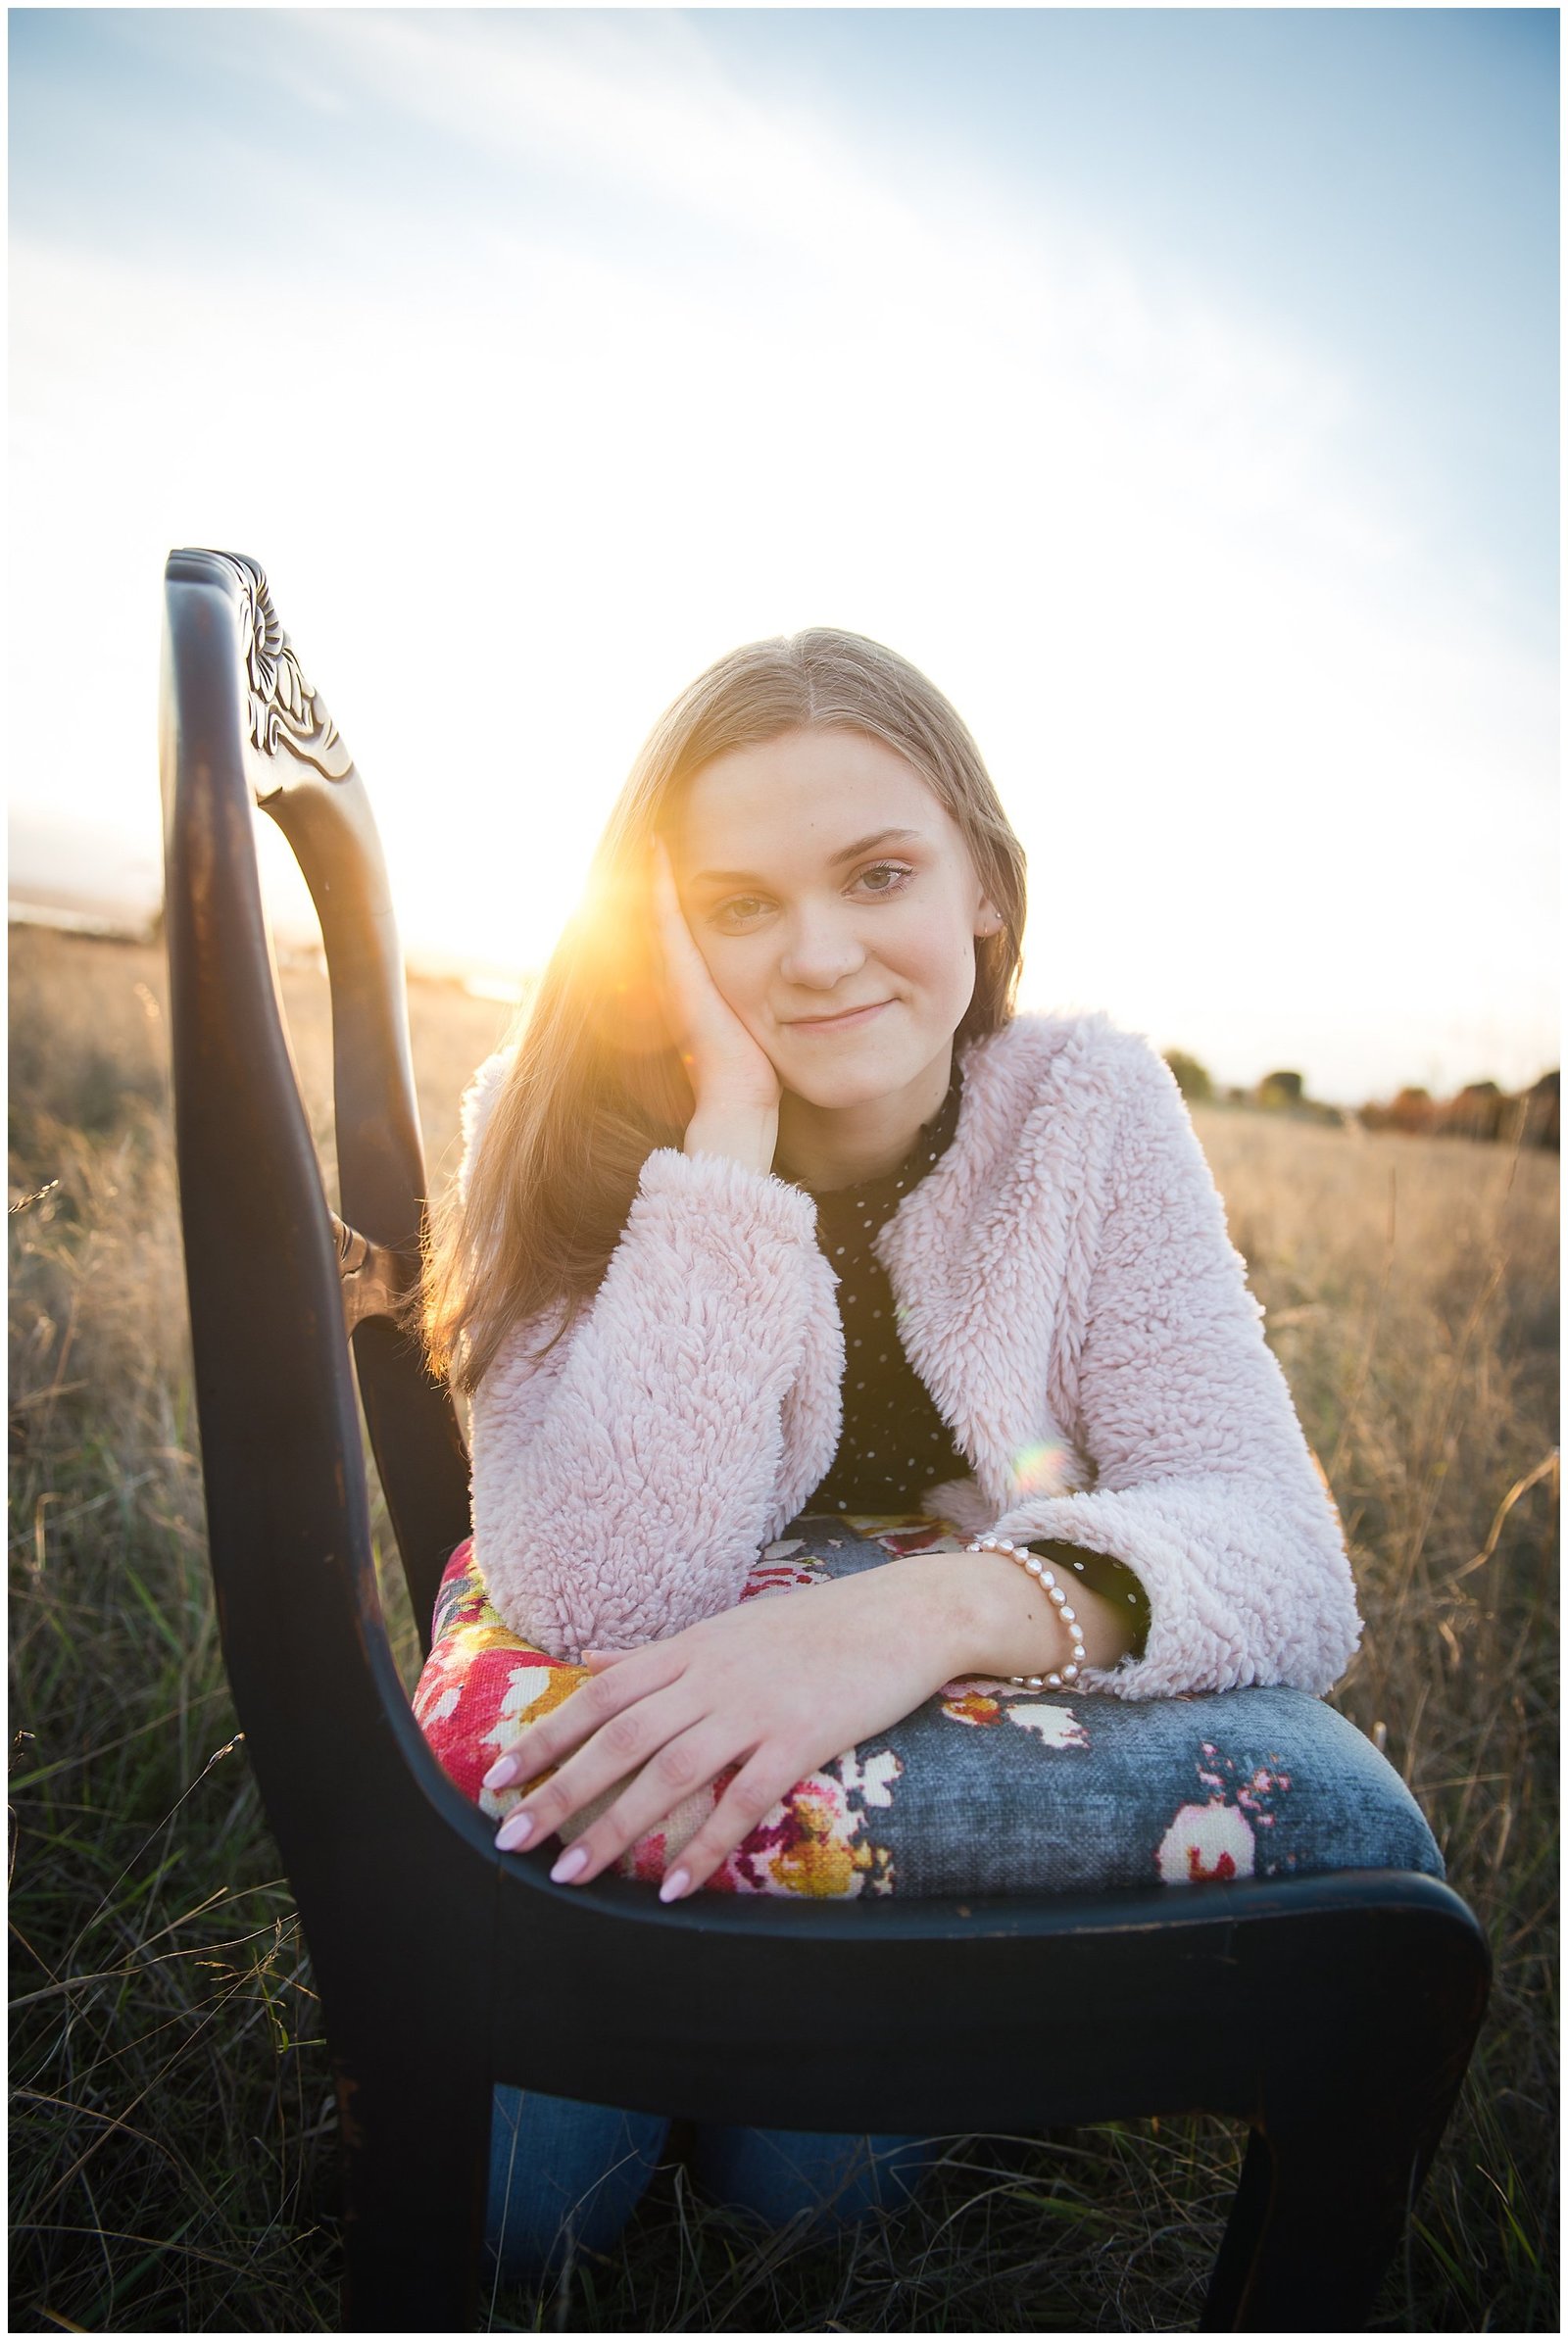 High School Senior Girl portrait on chair at sunset in field Emily Ann Photography Seattle Photographer